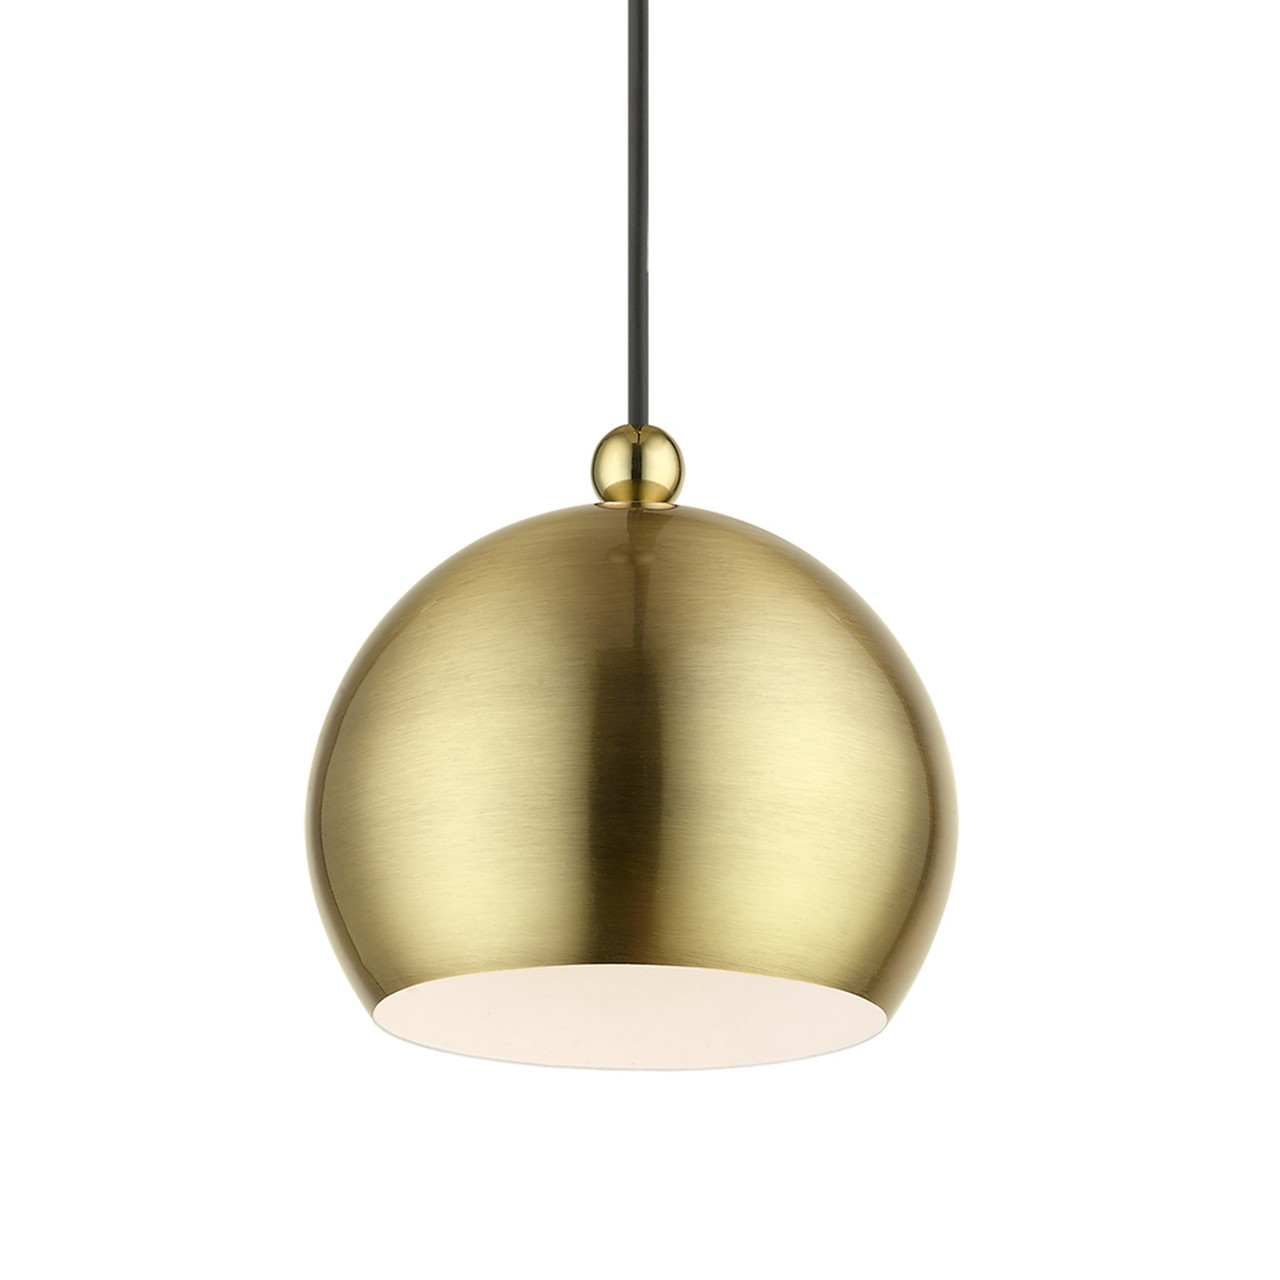 LIVEX LIGHTING 45481-01 1 Light Antique Brass with Polished Brass Accents Globe Mini Pendant